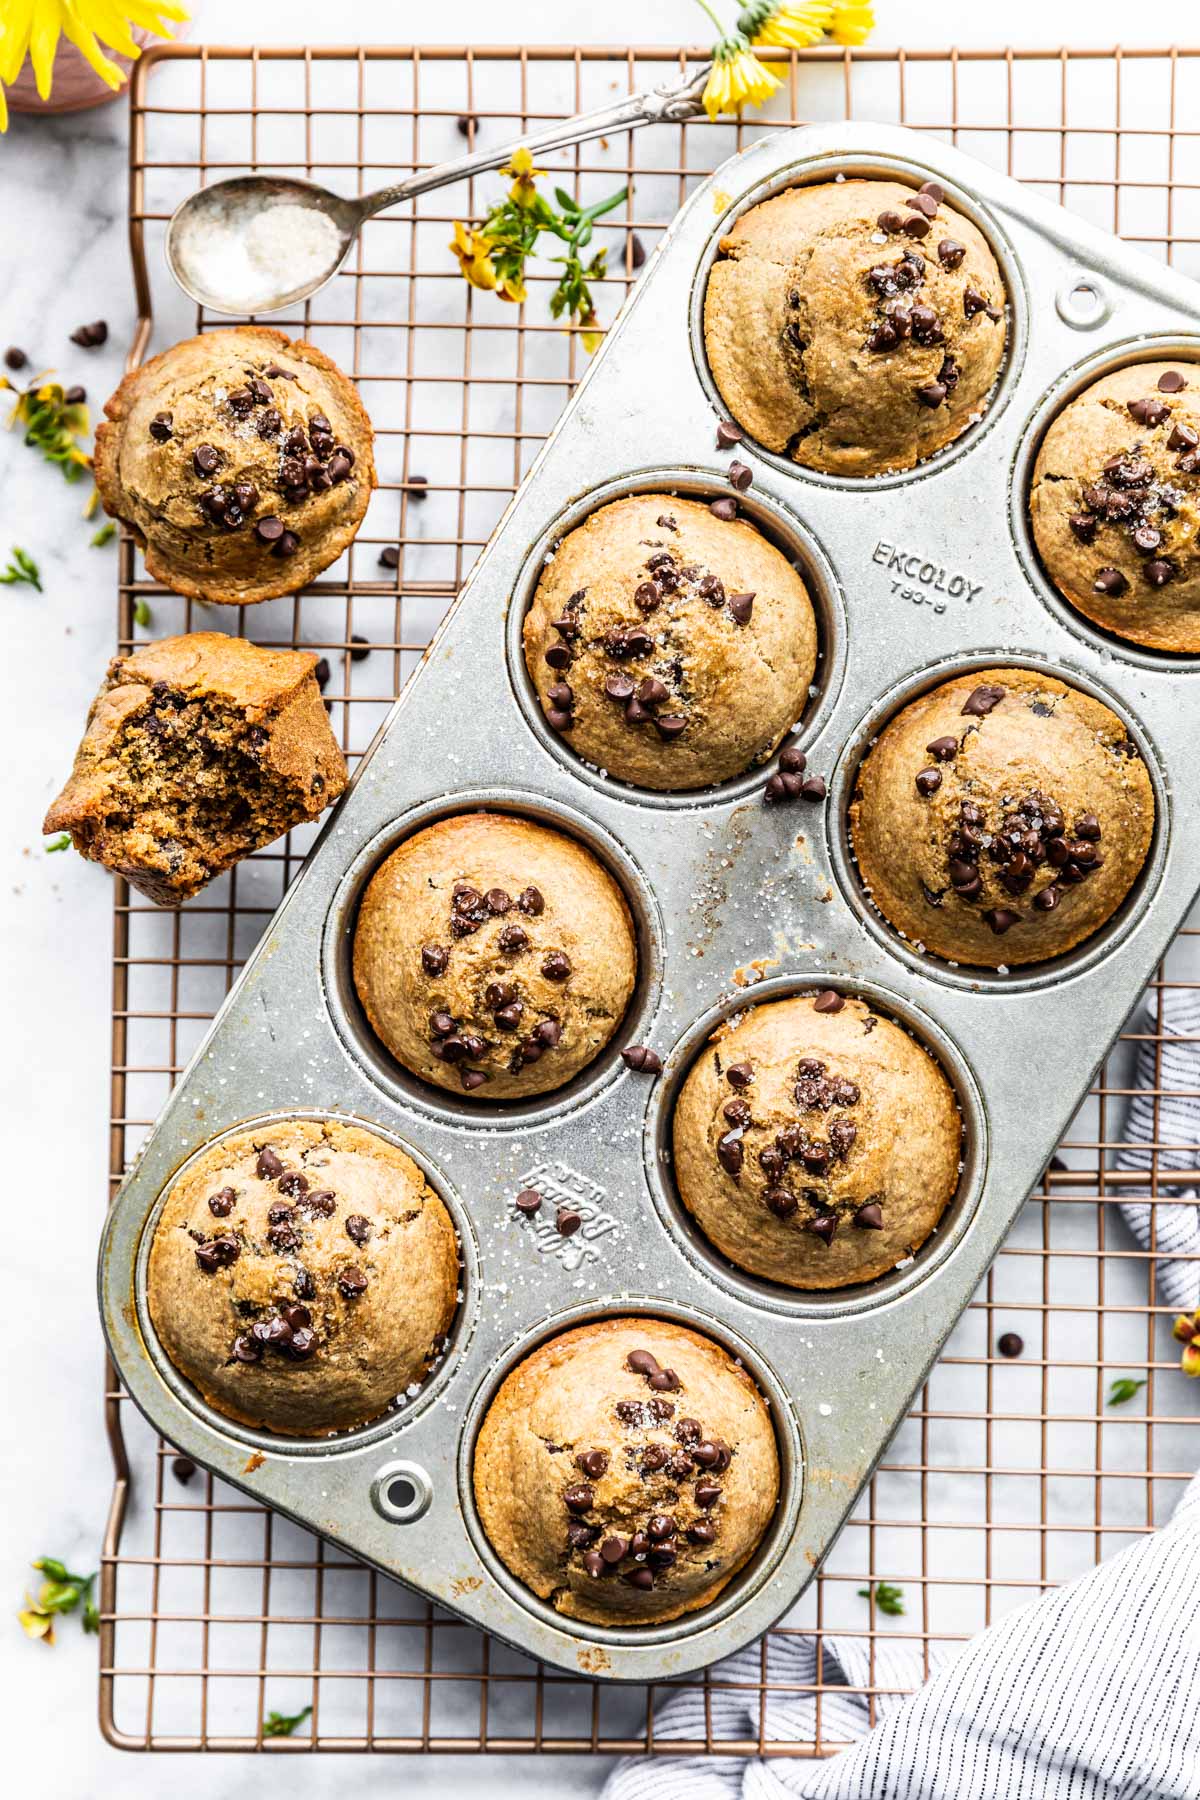 Chocolate chip Muffins in muffin pan. Sitting on cooling wrack. Two muffins out of pan and one with bite taken out. Spoon of sugar above pan